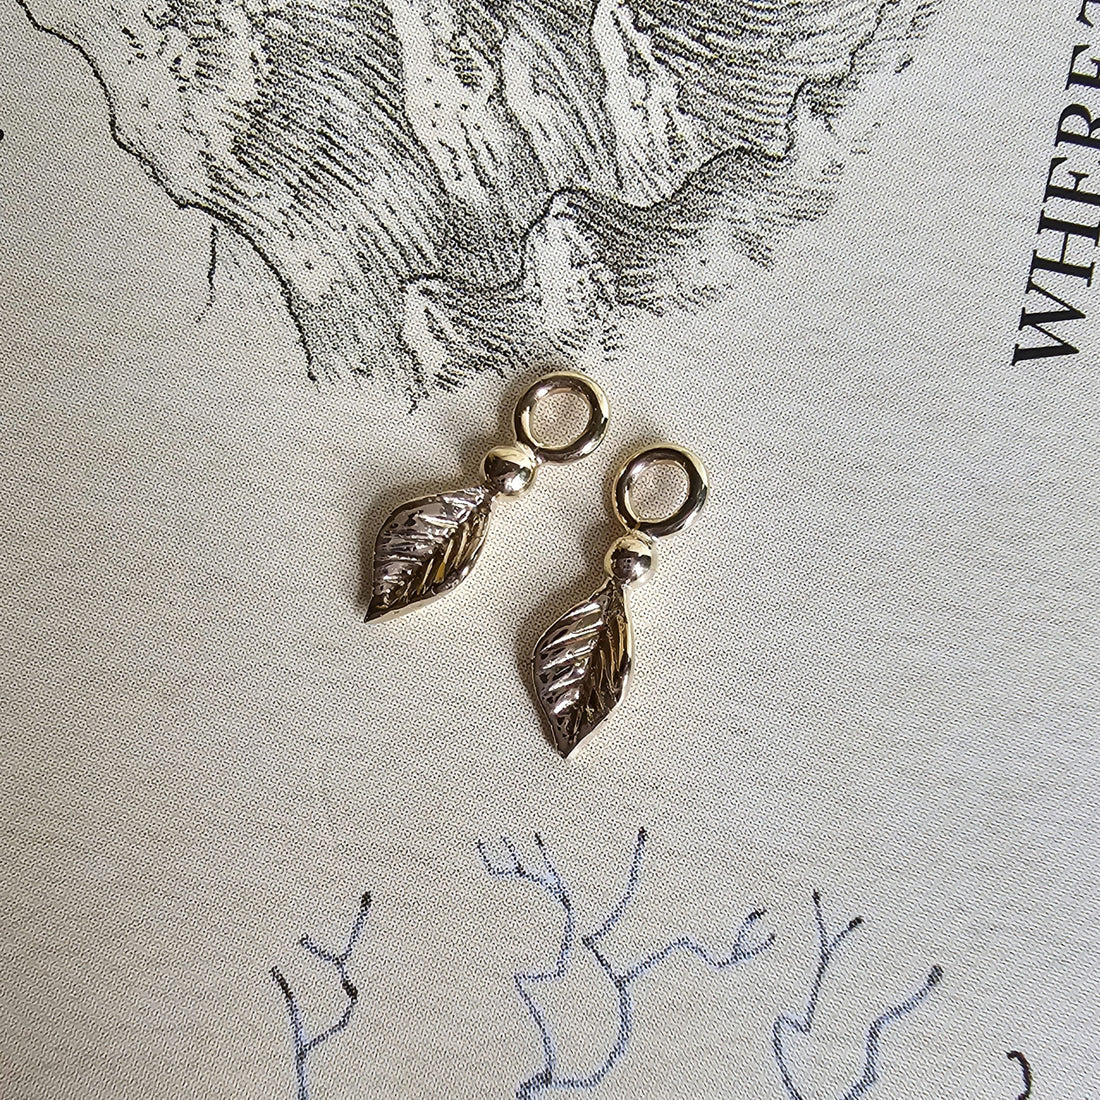 Earring Charms with Leaf and Dot